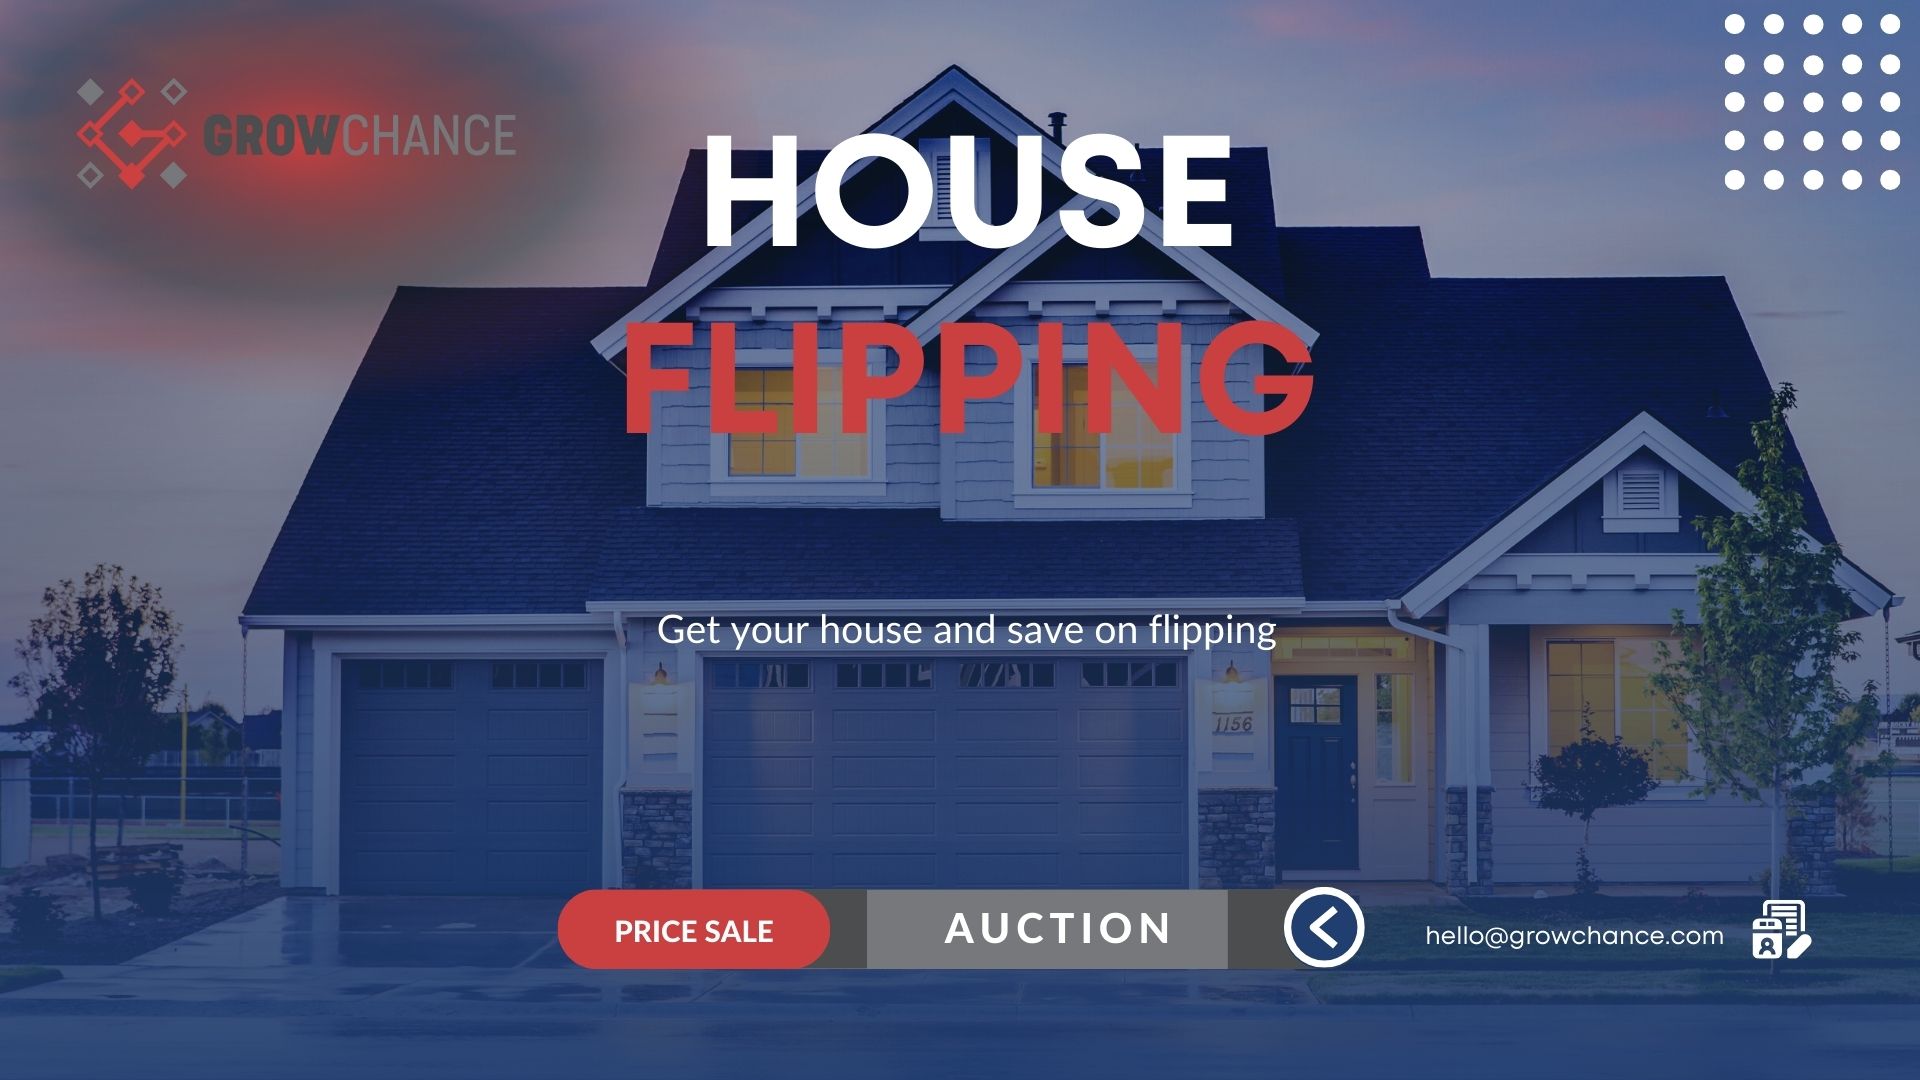 Flipping houses